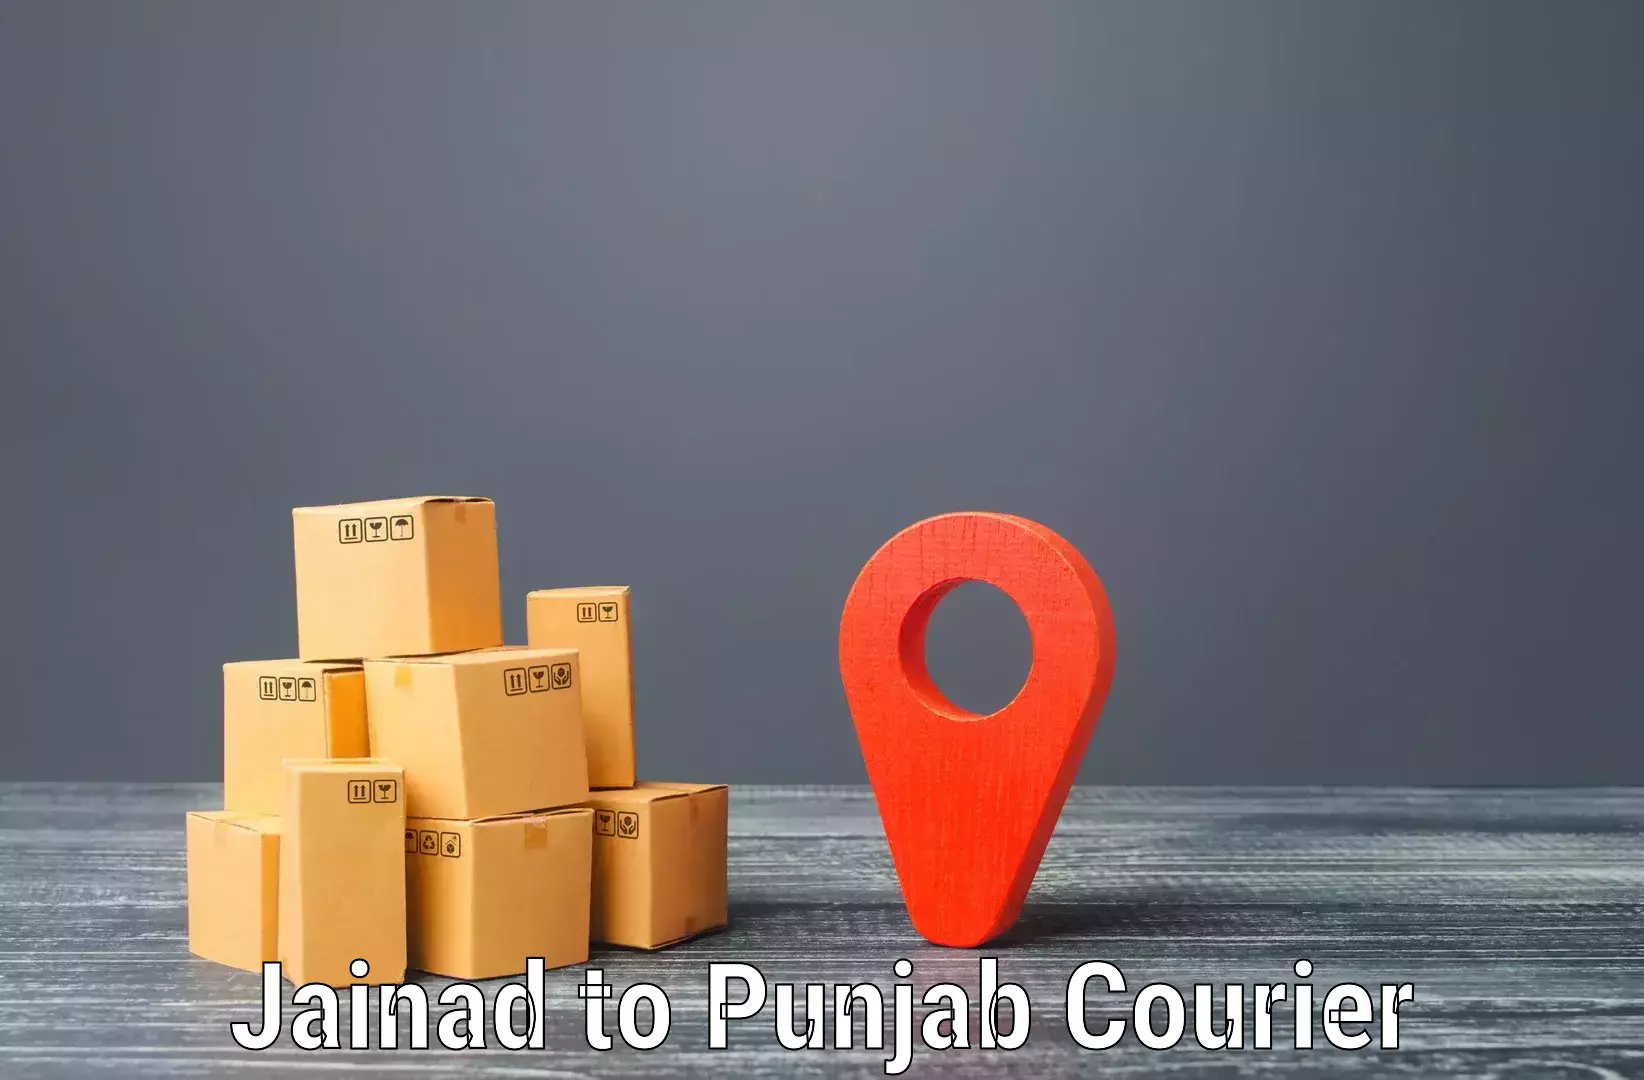 Reliable delivery network in Jainad to Dinanagar